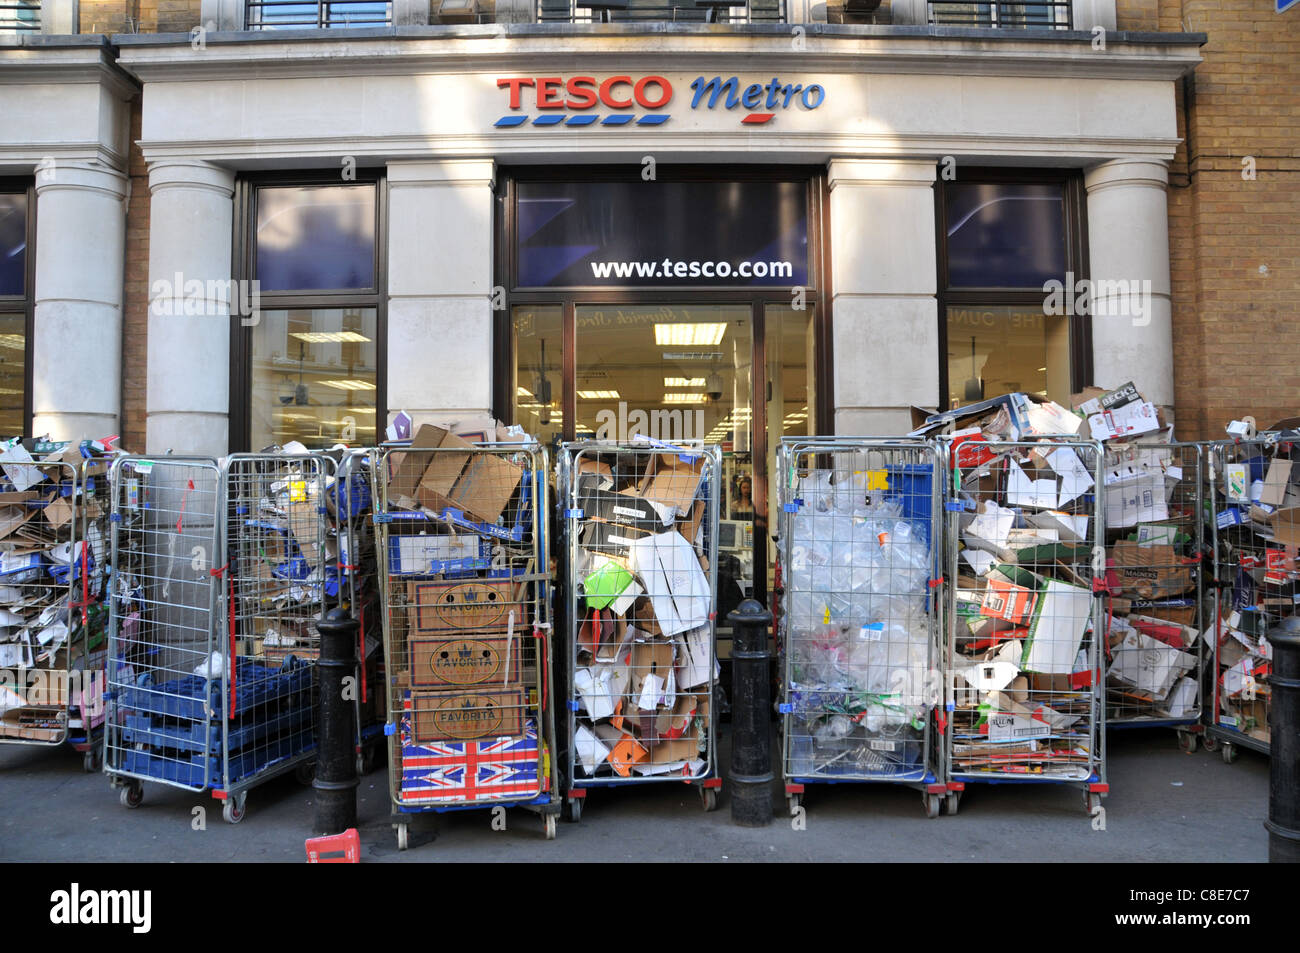 Tesco Metro Store Covent Garden London waste recycling packaging cardboard boxes food packaging retail Stock Photo